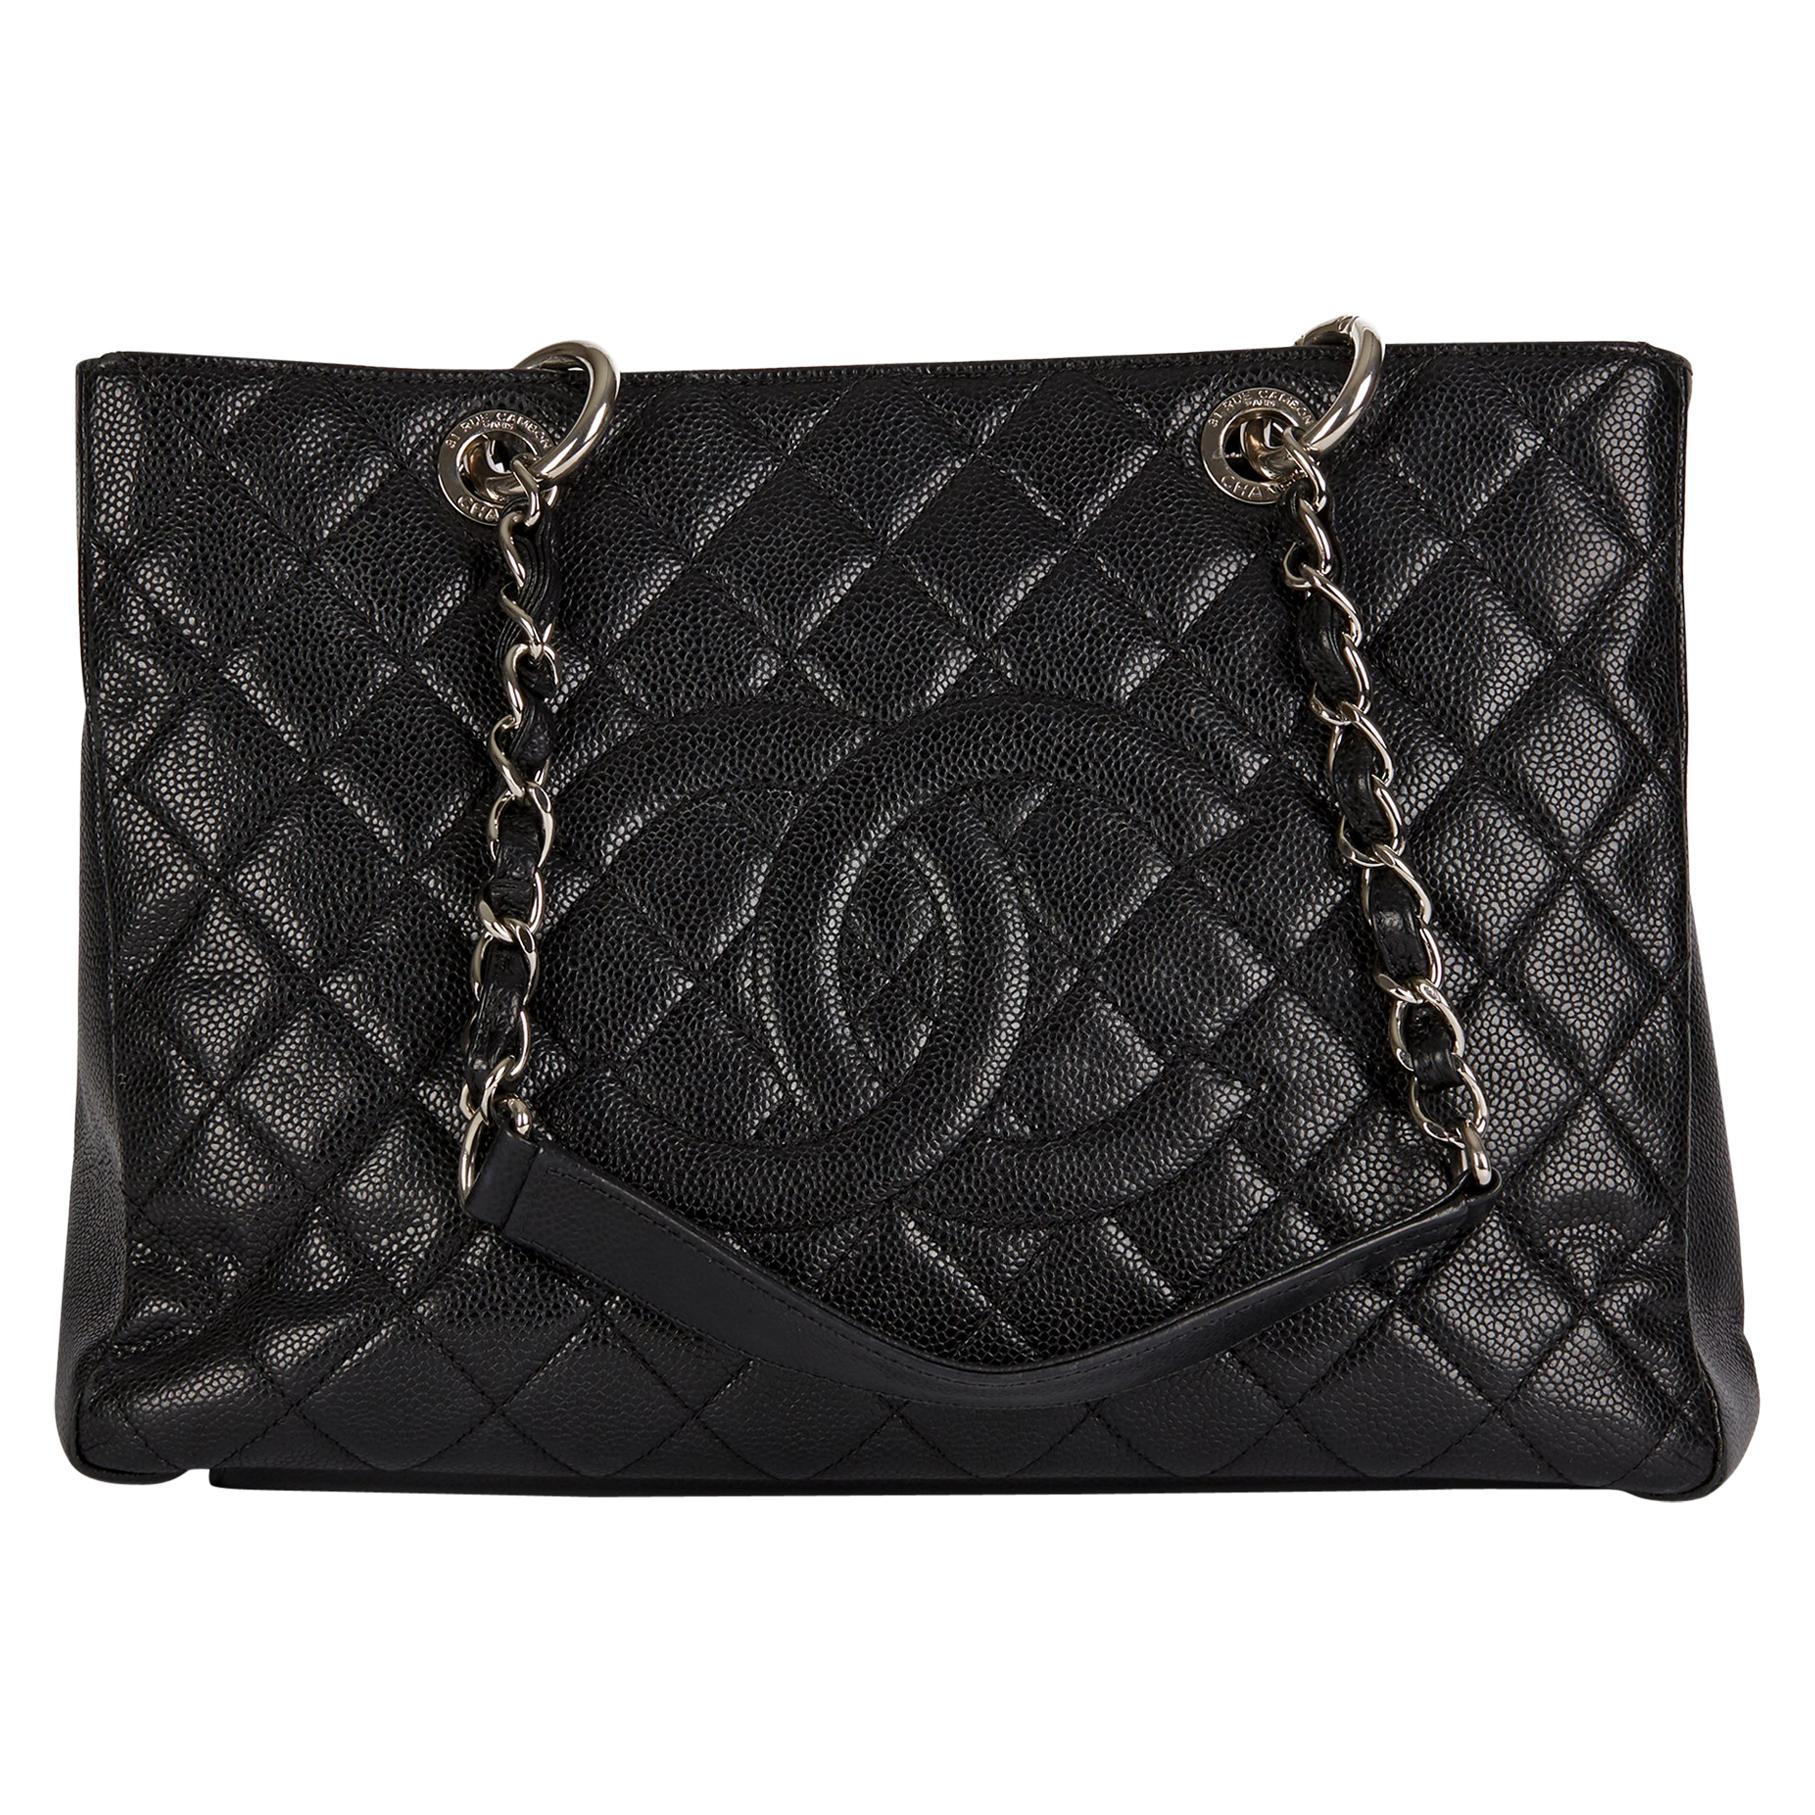 2013 Chanel Black Quilted Caviar Leather Grand Shopping Tote 